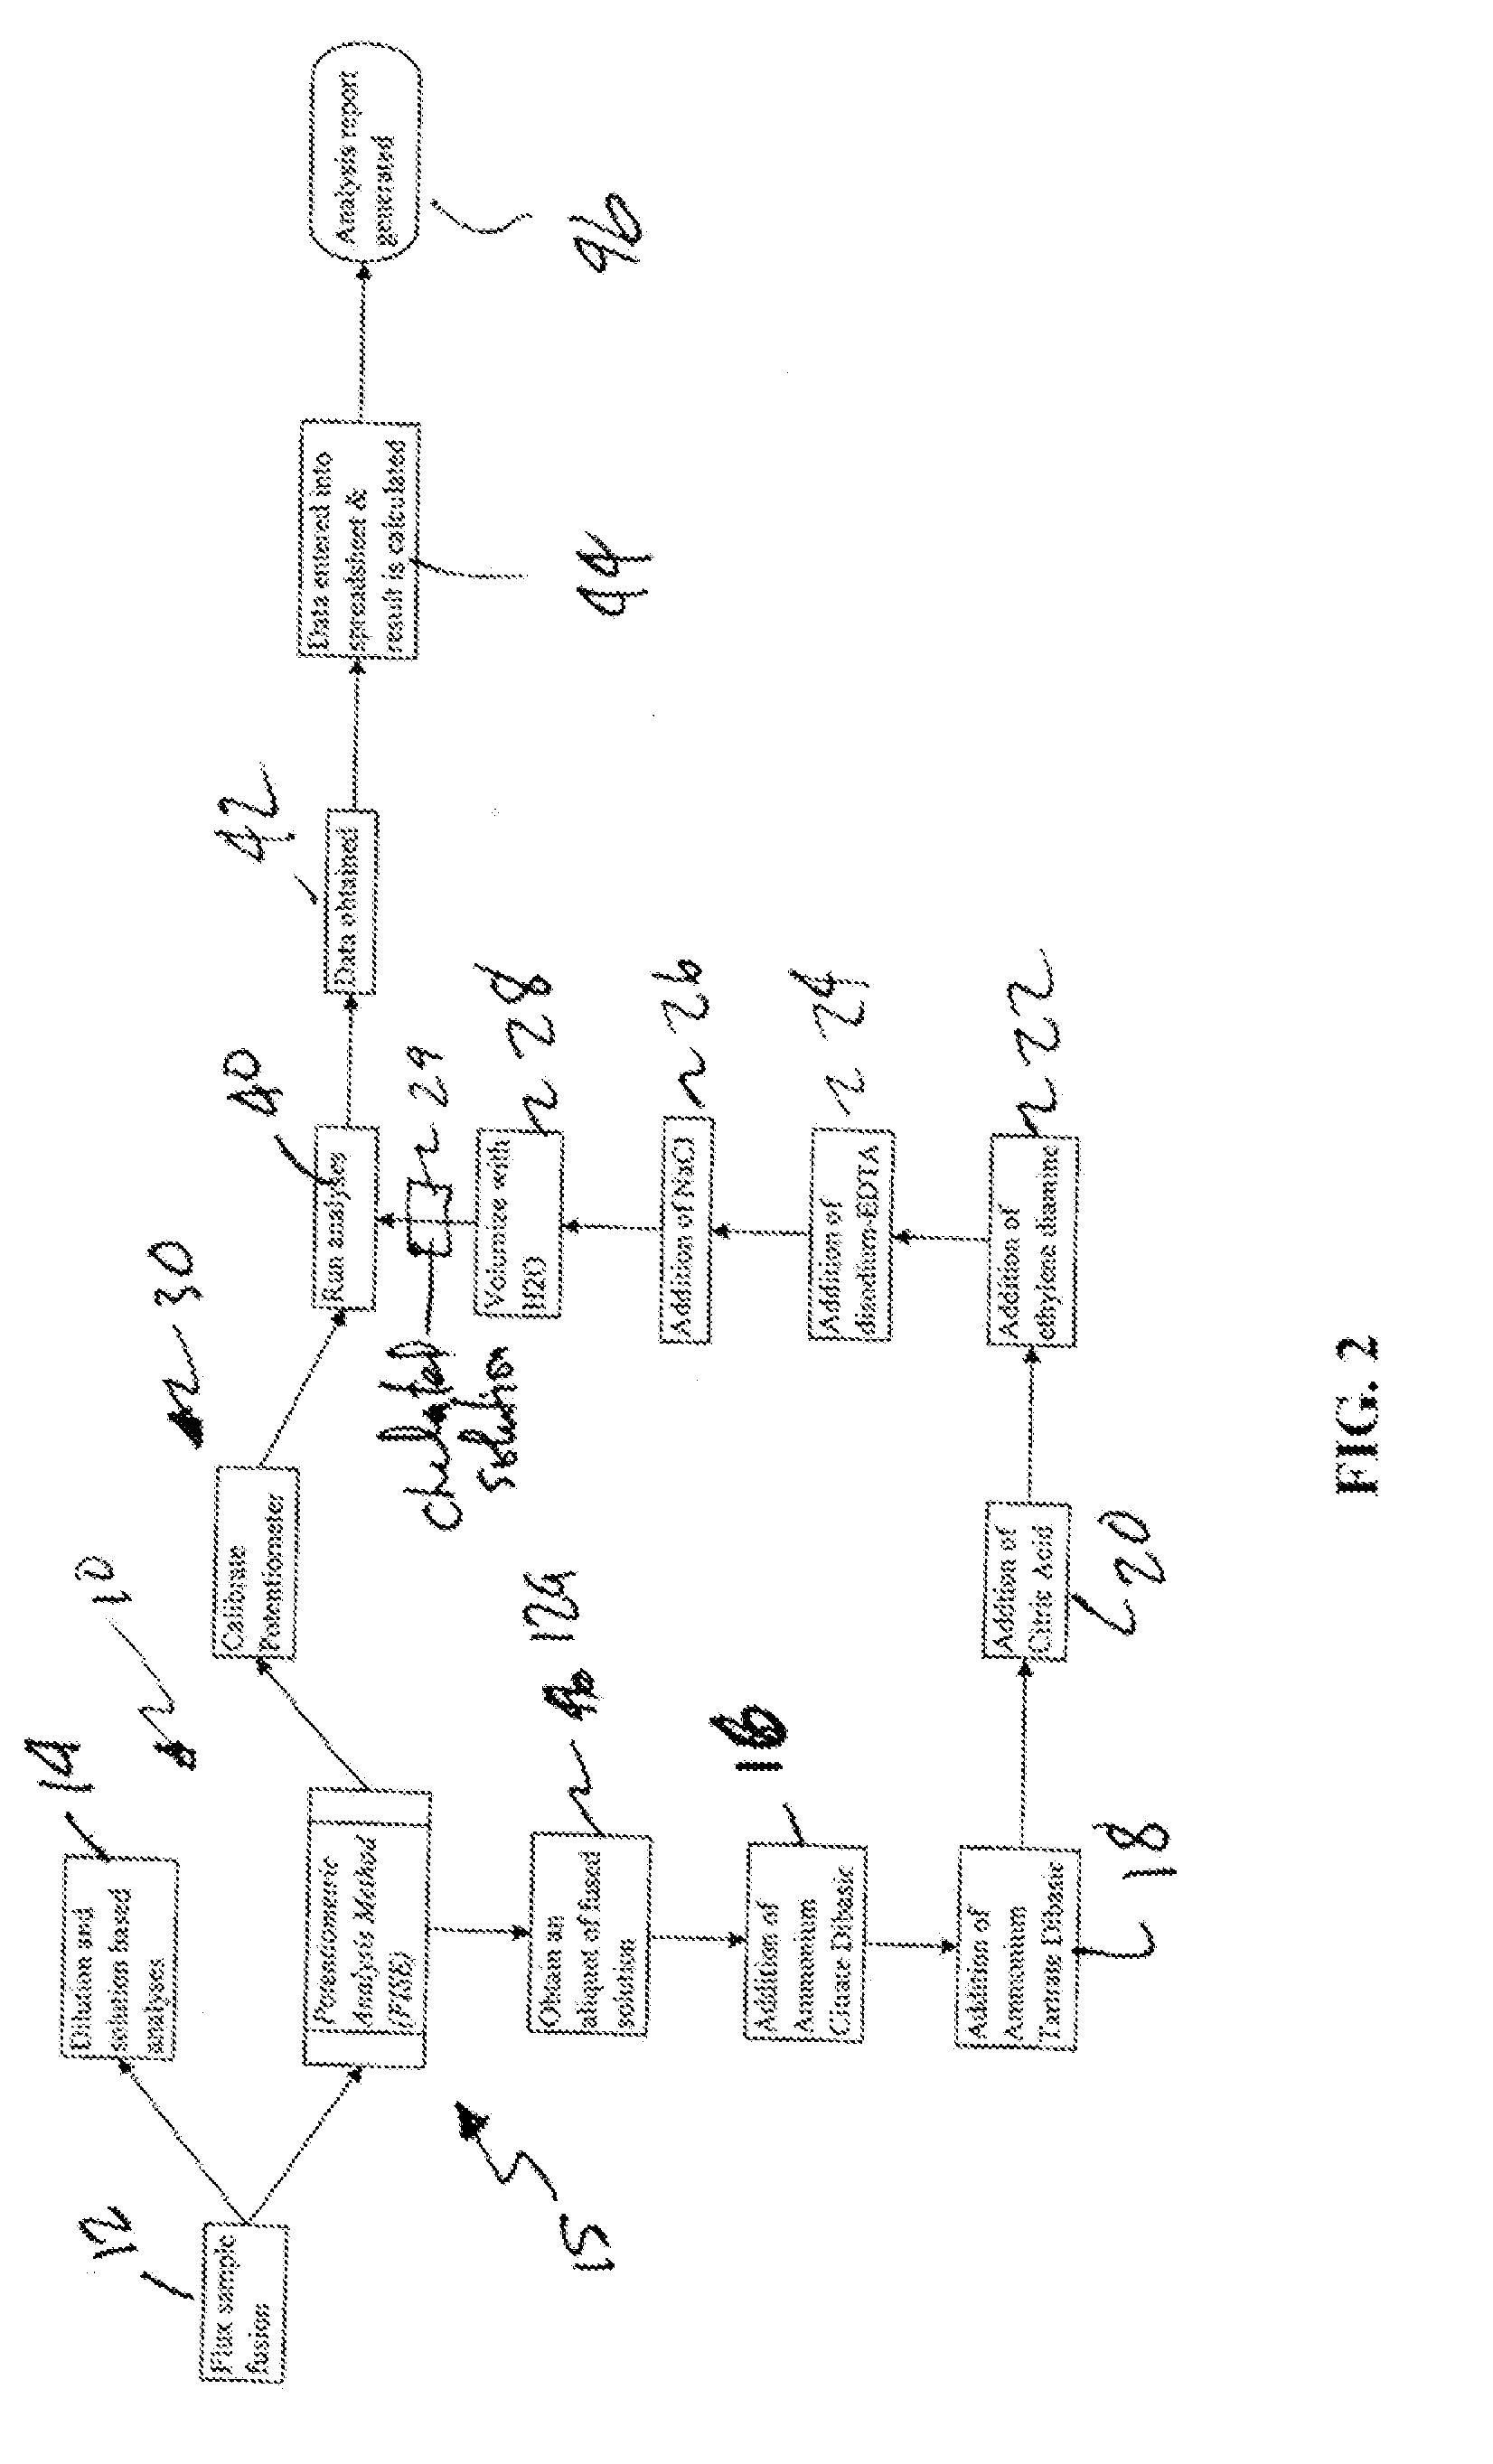 Method of Measuring Fluoride in Fluxes Using the Fluoride Ion-Selective Electrode